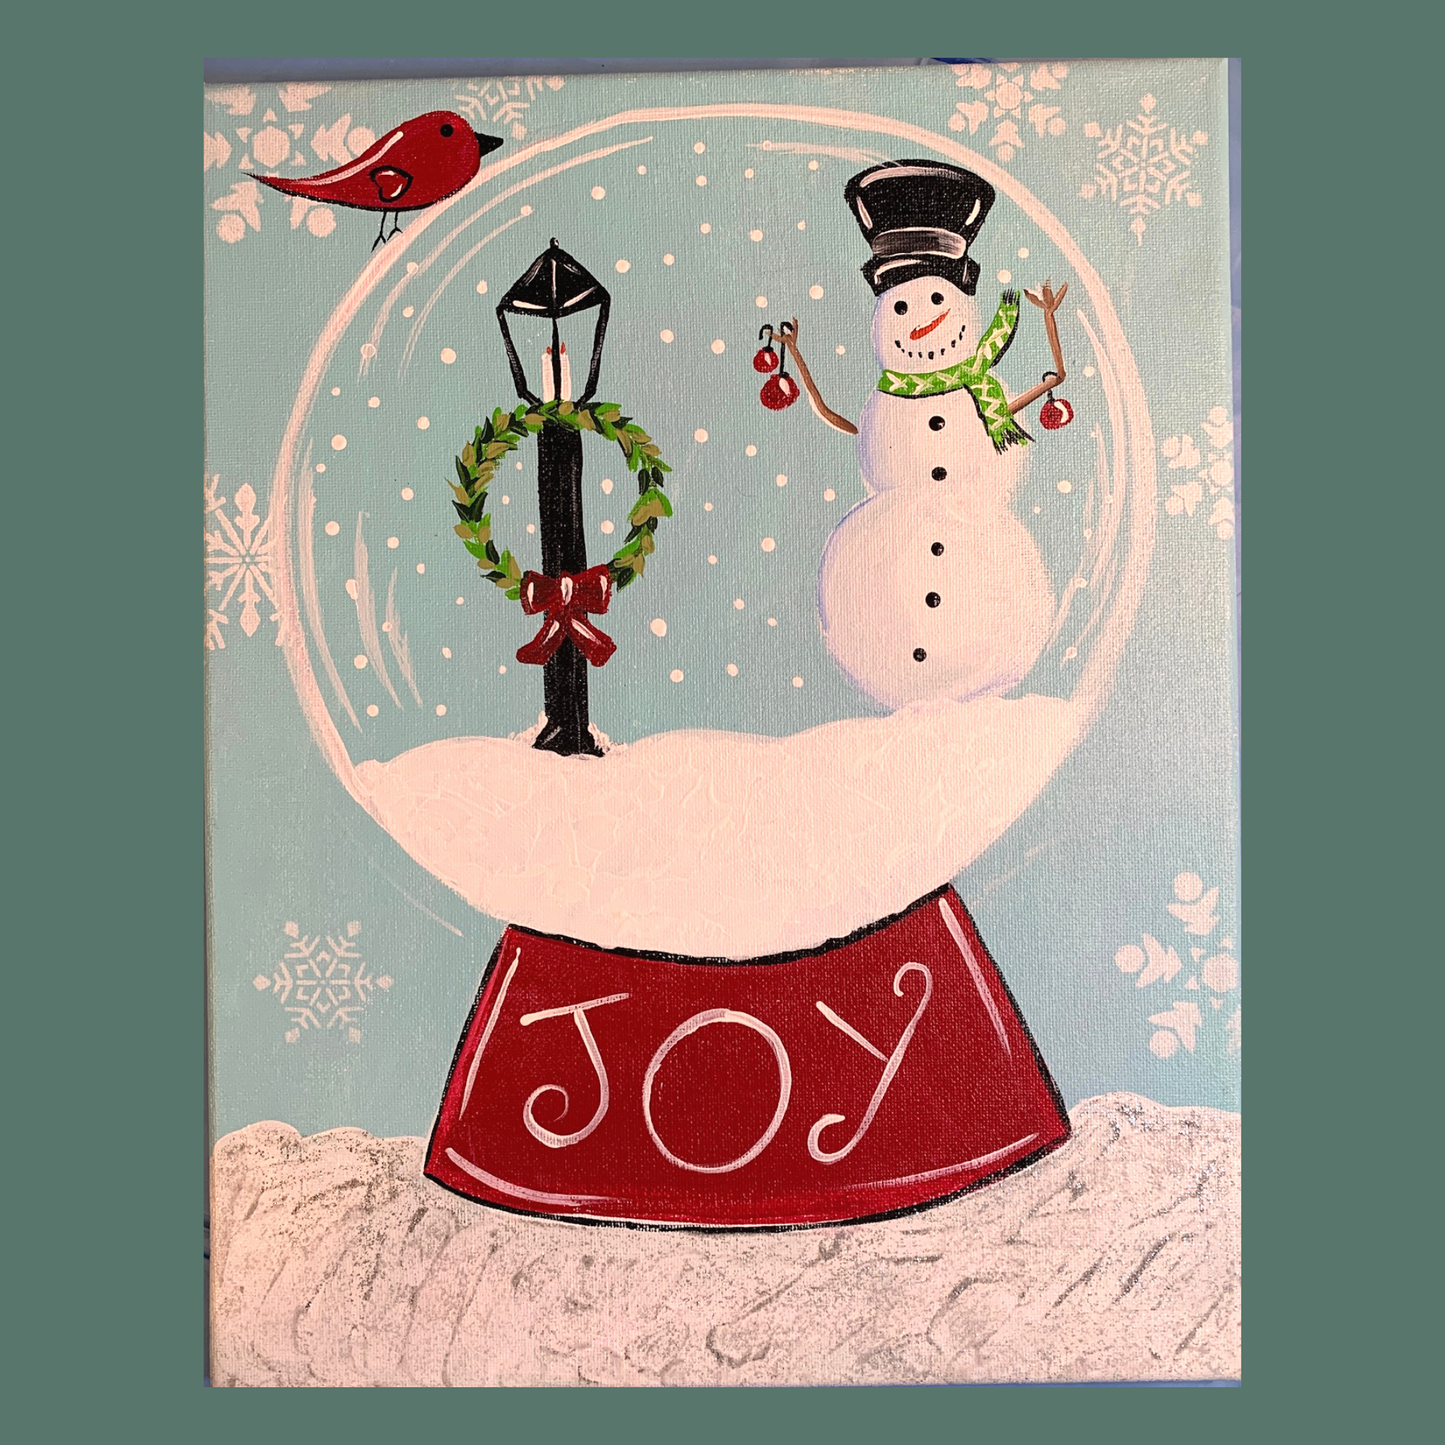 Snow Globe Snowman Scene Art Party Kit! At Home Paint Party Supplies! Beginner Friendly!